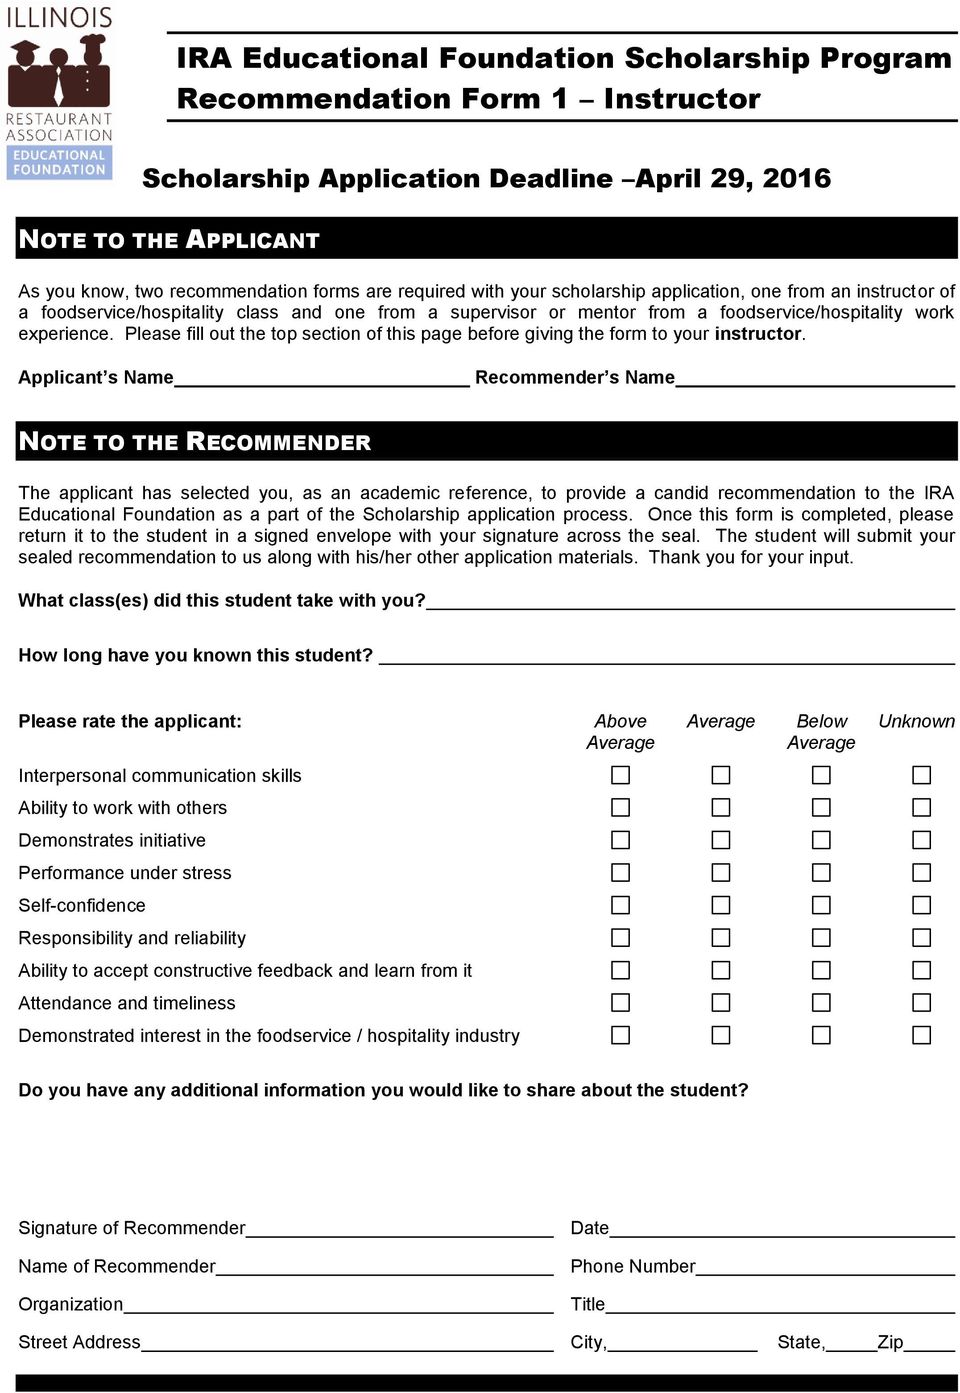 Please fill out the top section of this page before giving the form to your instructor.